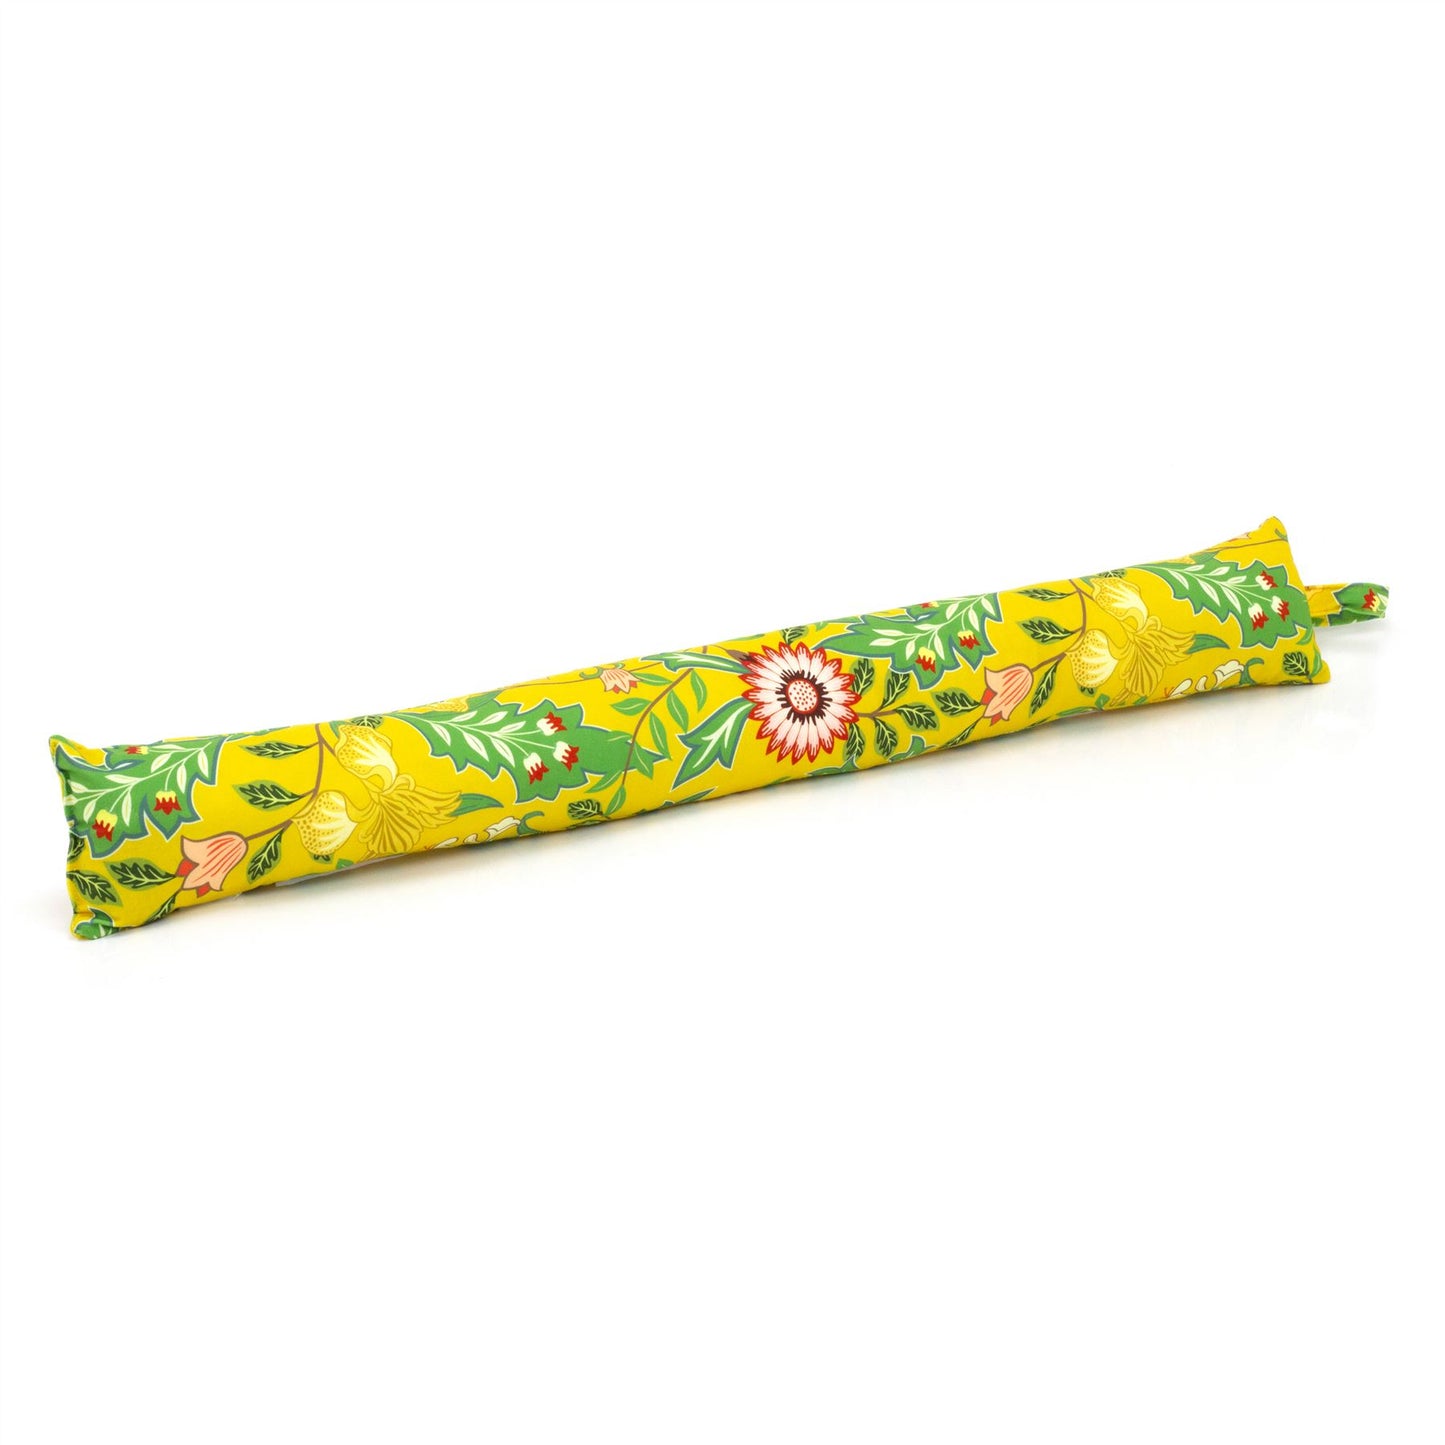 2 Piece Sussex Floral Doorstop And Draught Excluder | Decorative Fabric Door Stop With Draft Excluder | Floral Draught Excluder & Doorstopper - Yellow